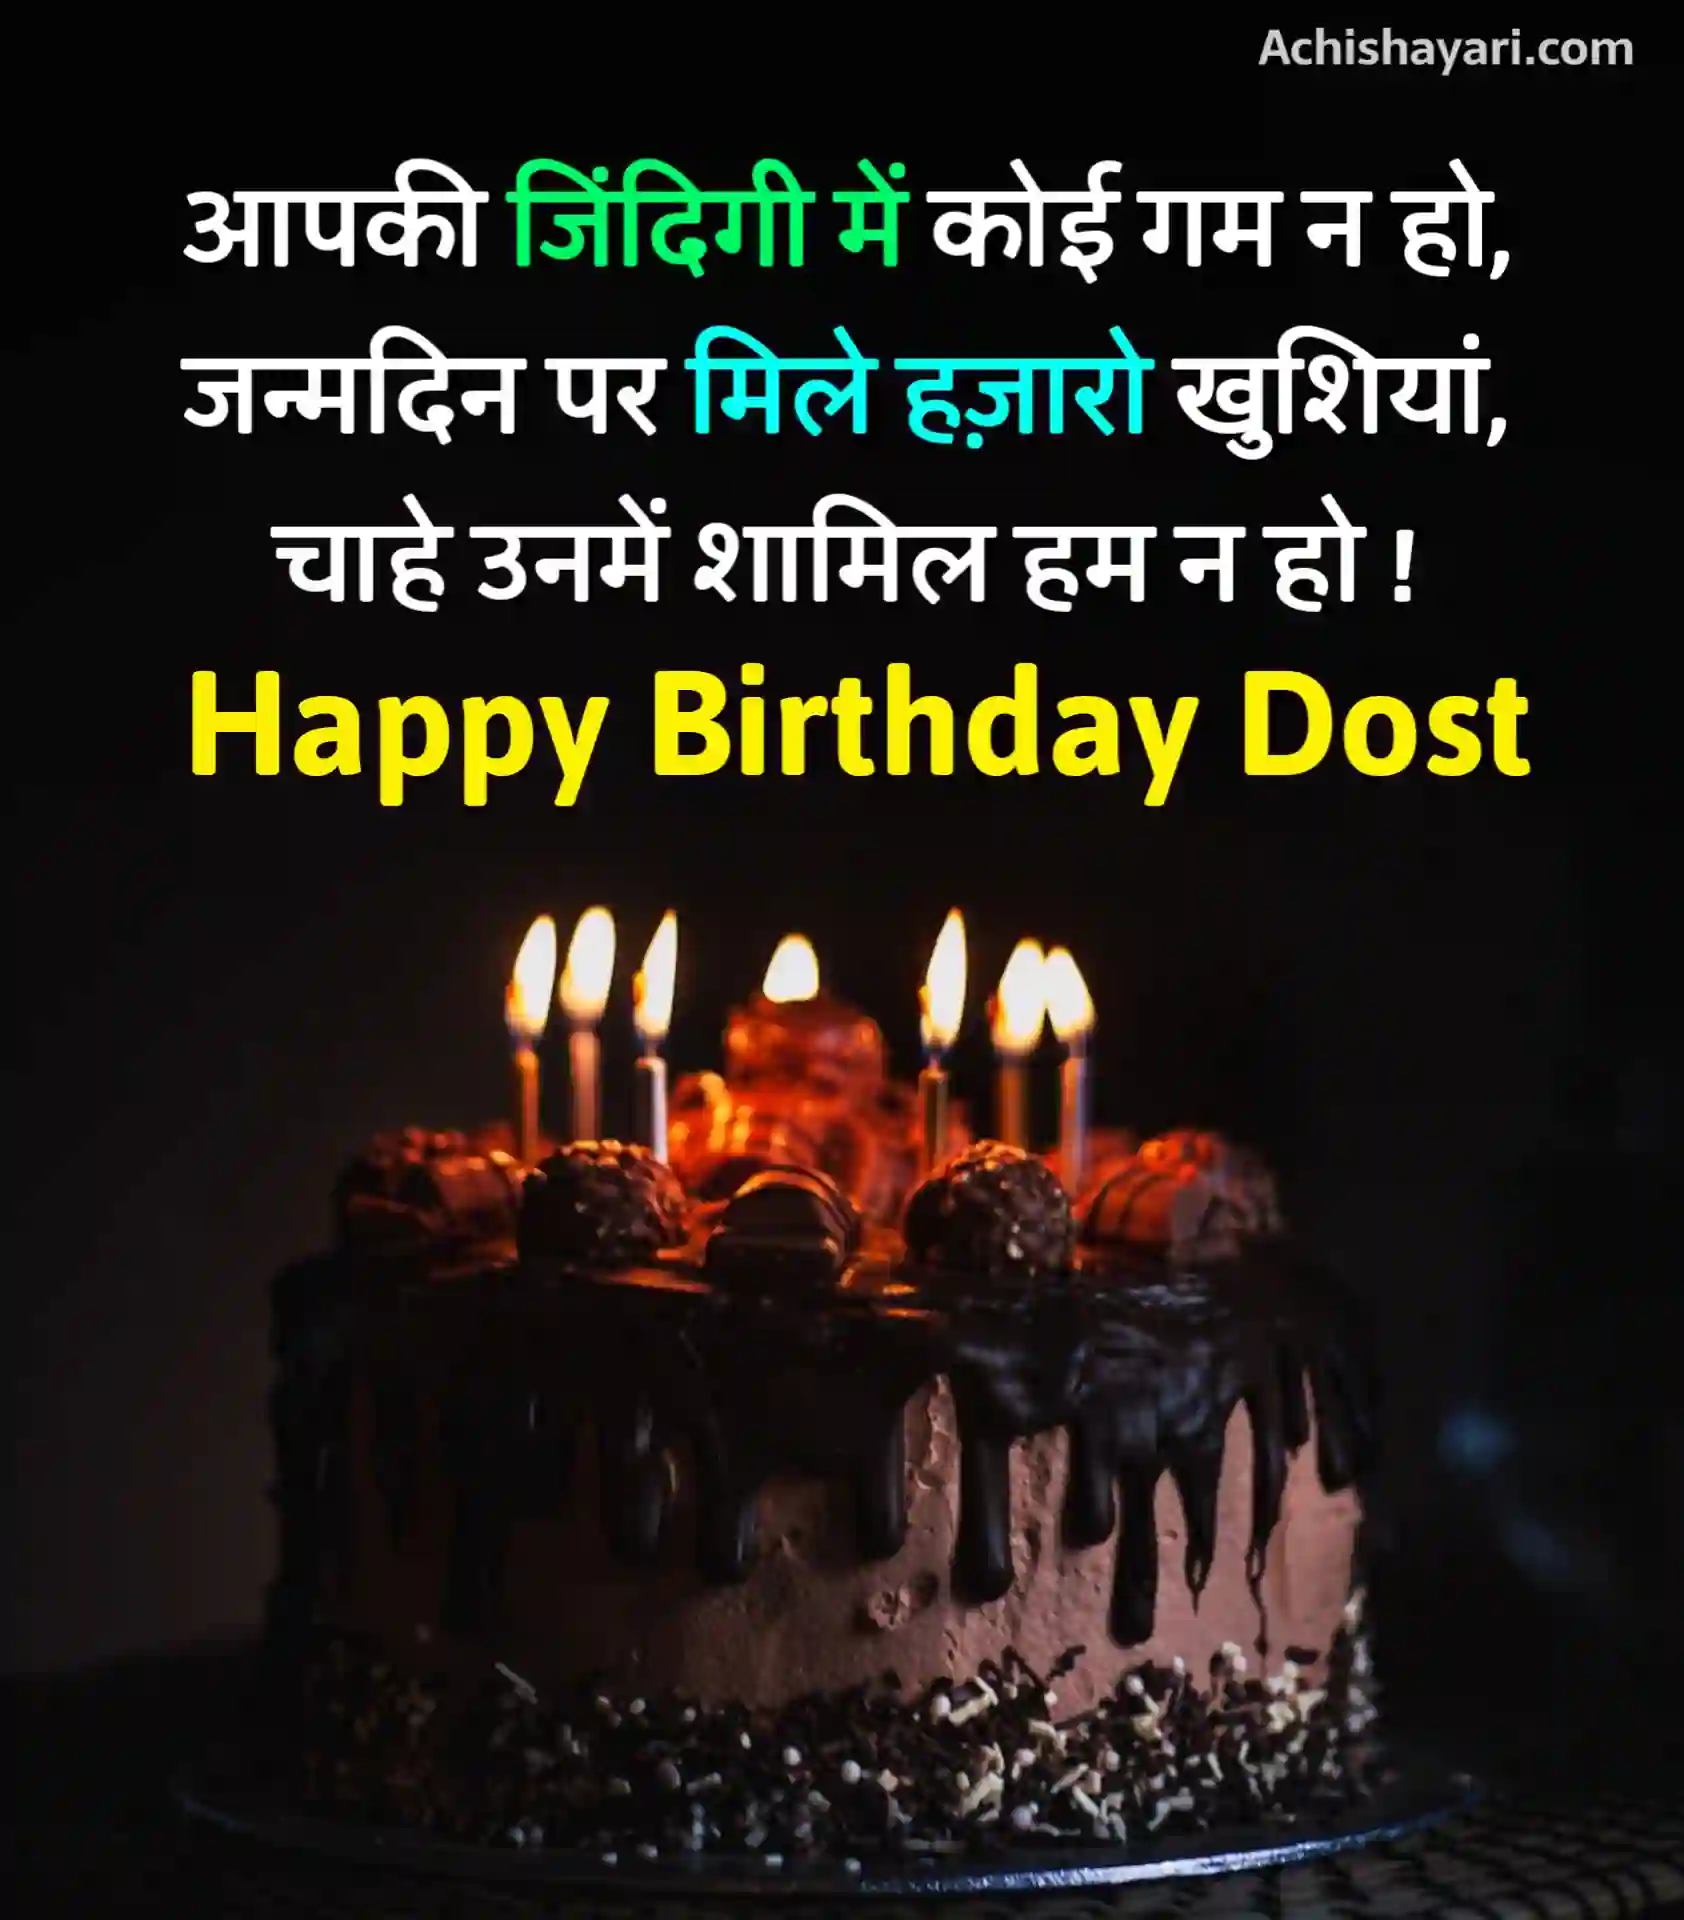 Happy Birthday Wishes for Friend in Hindi